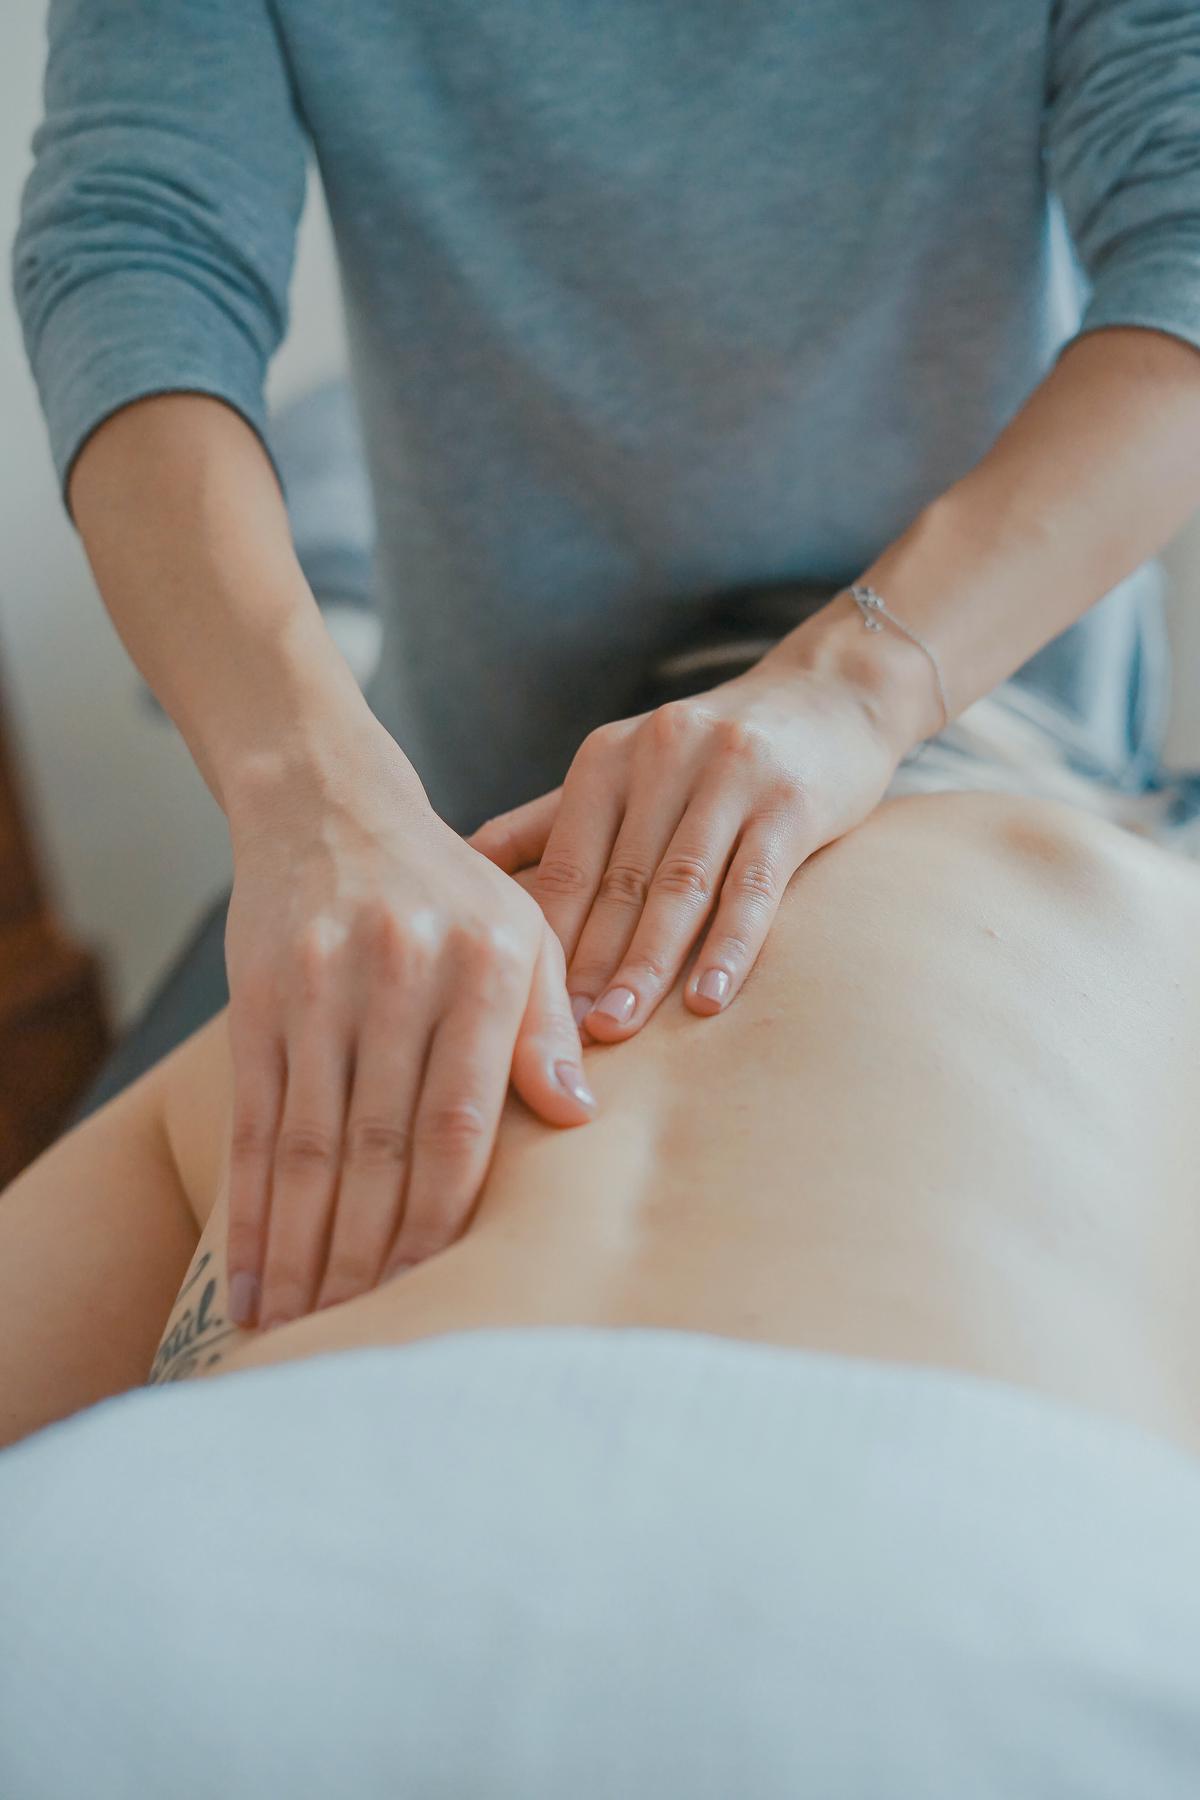 Image of a person receiving chiropractic treatment during a session.